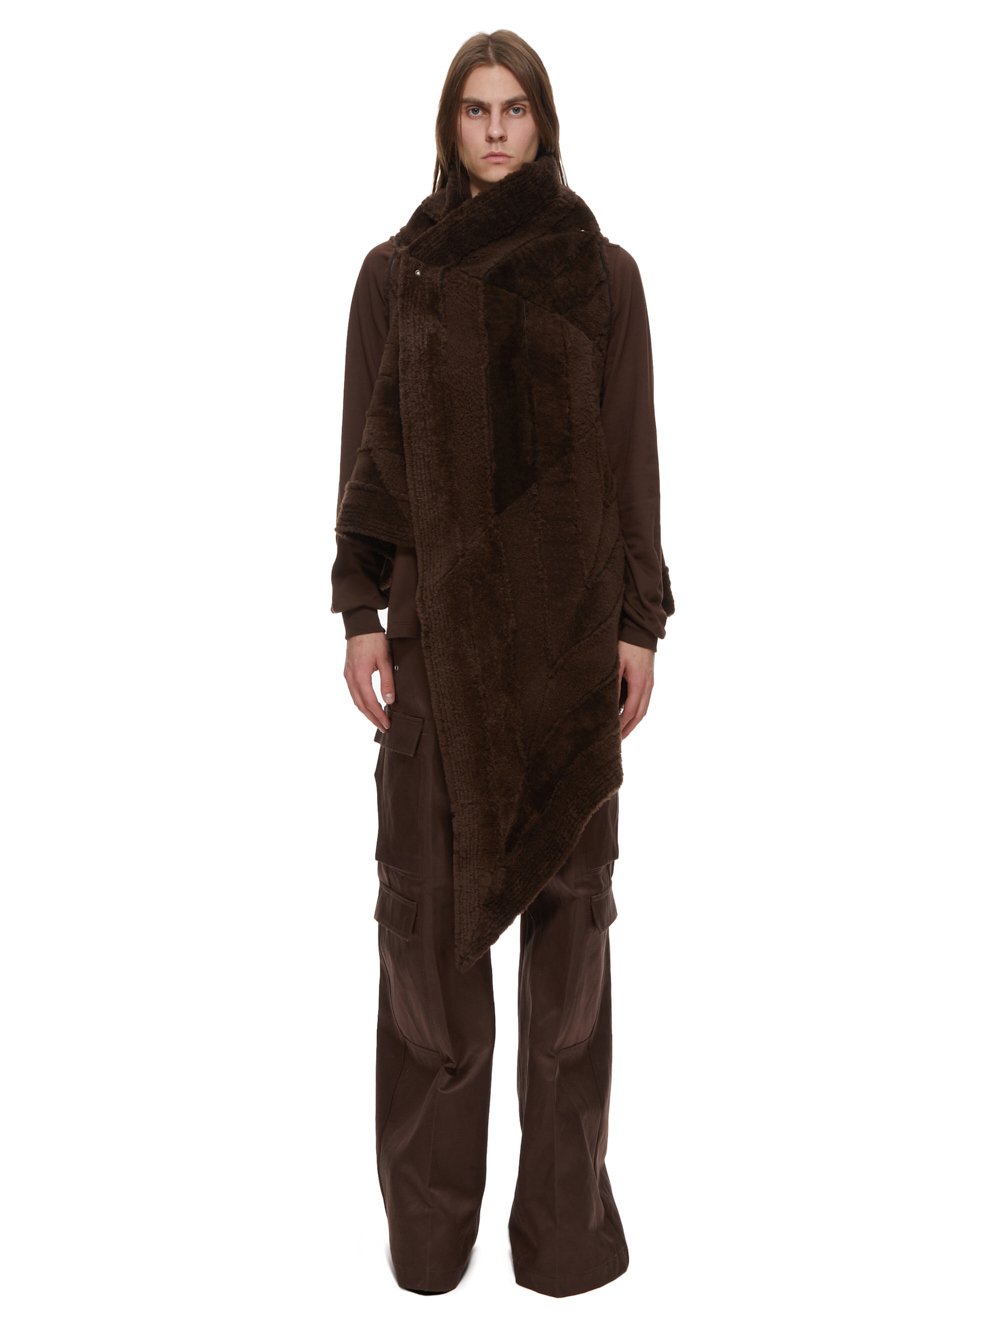 RICK OWENS FW23 LUXOR GLEAM VEST IN BROWN BUTTER LAMB SHEARLING RADIANCE